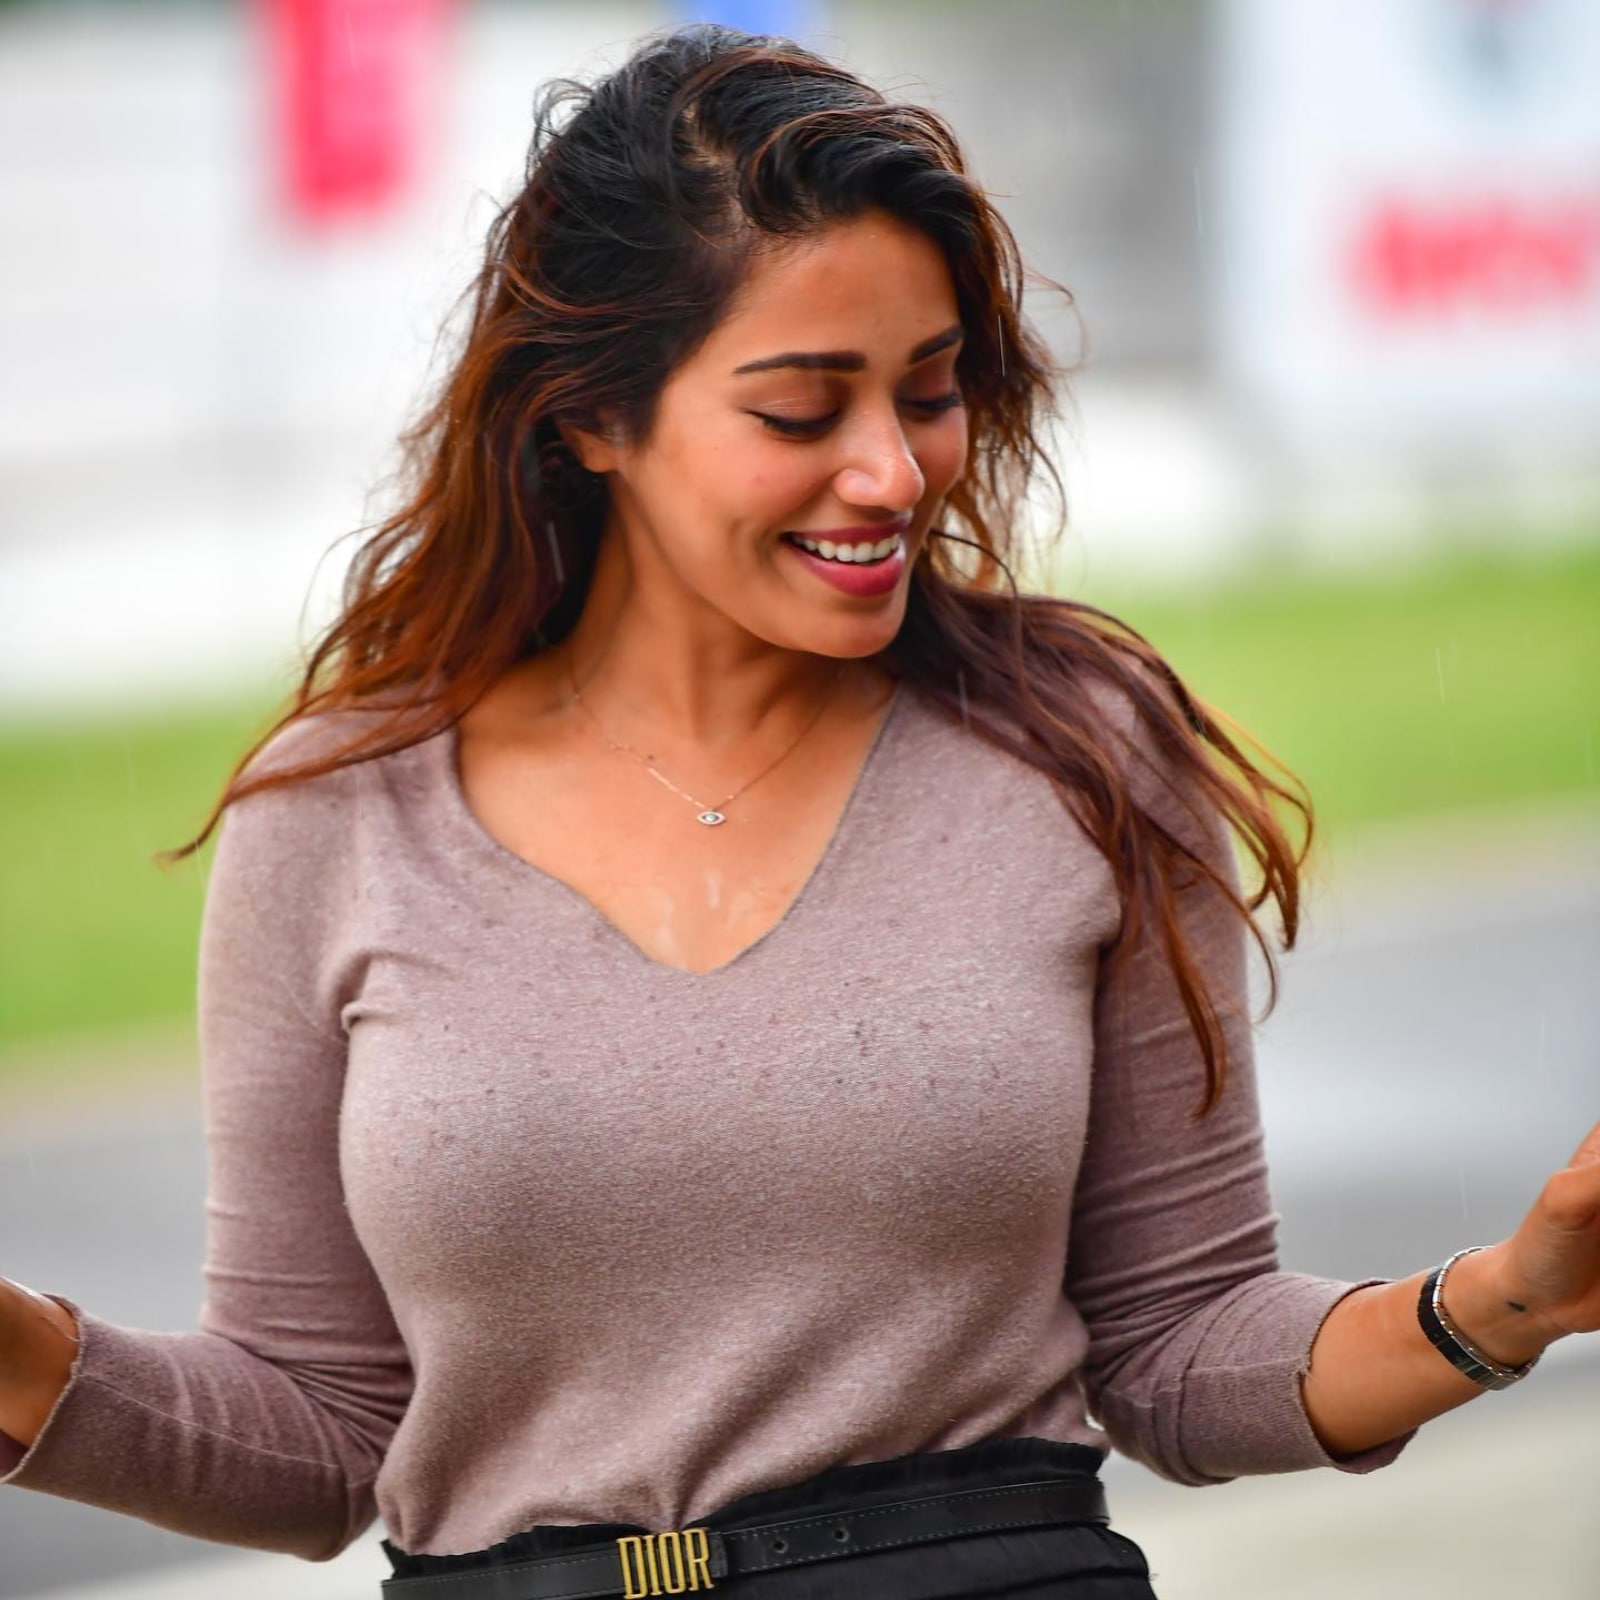 Tamil Actor Nivetha Pethuraj is Giving Major Outfit Goals in These Pictures  - News18